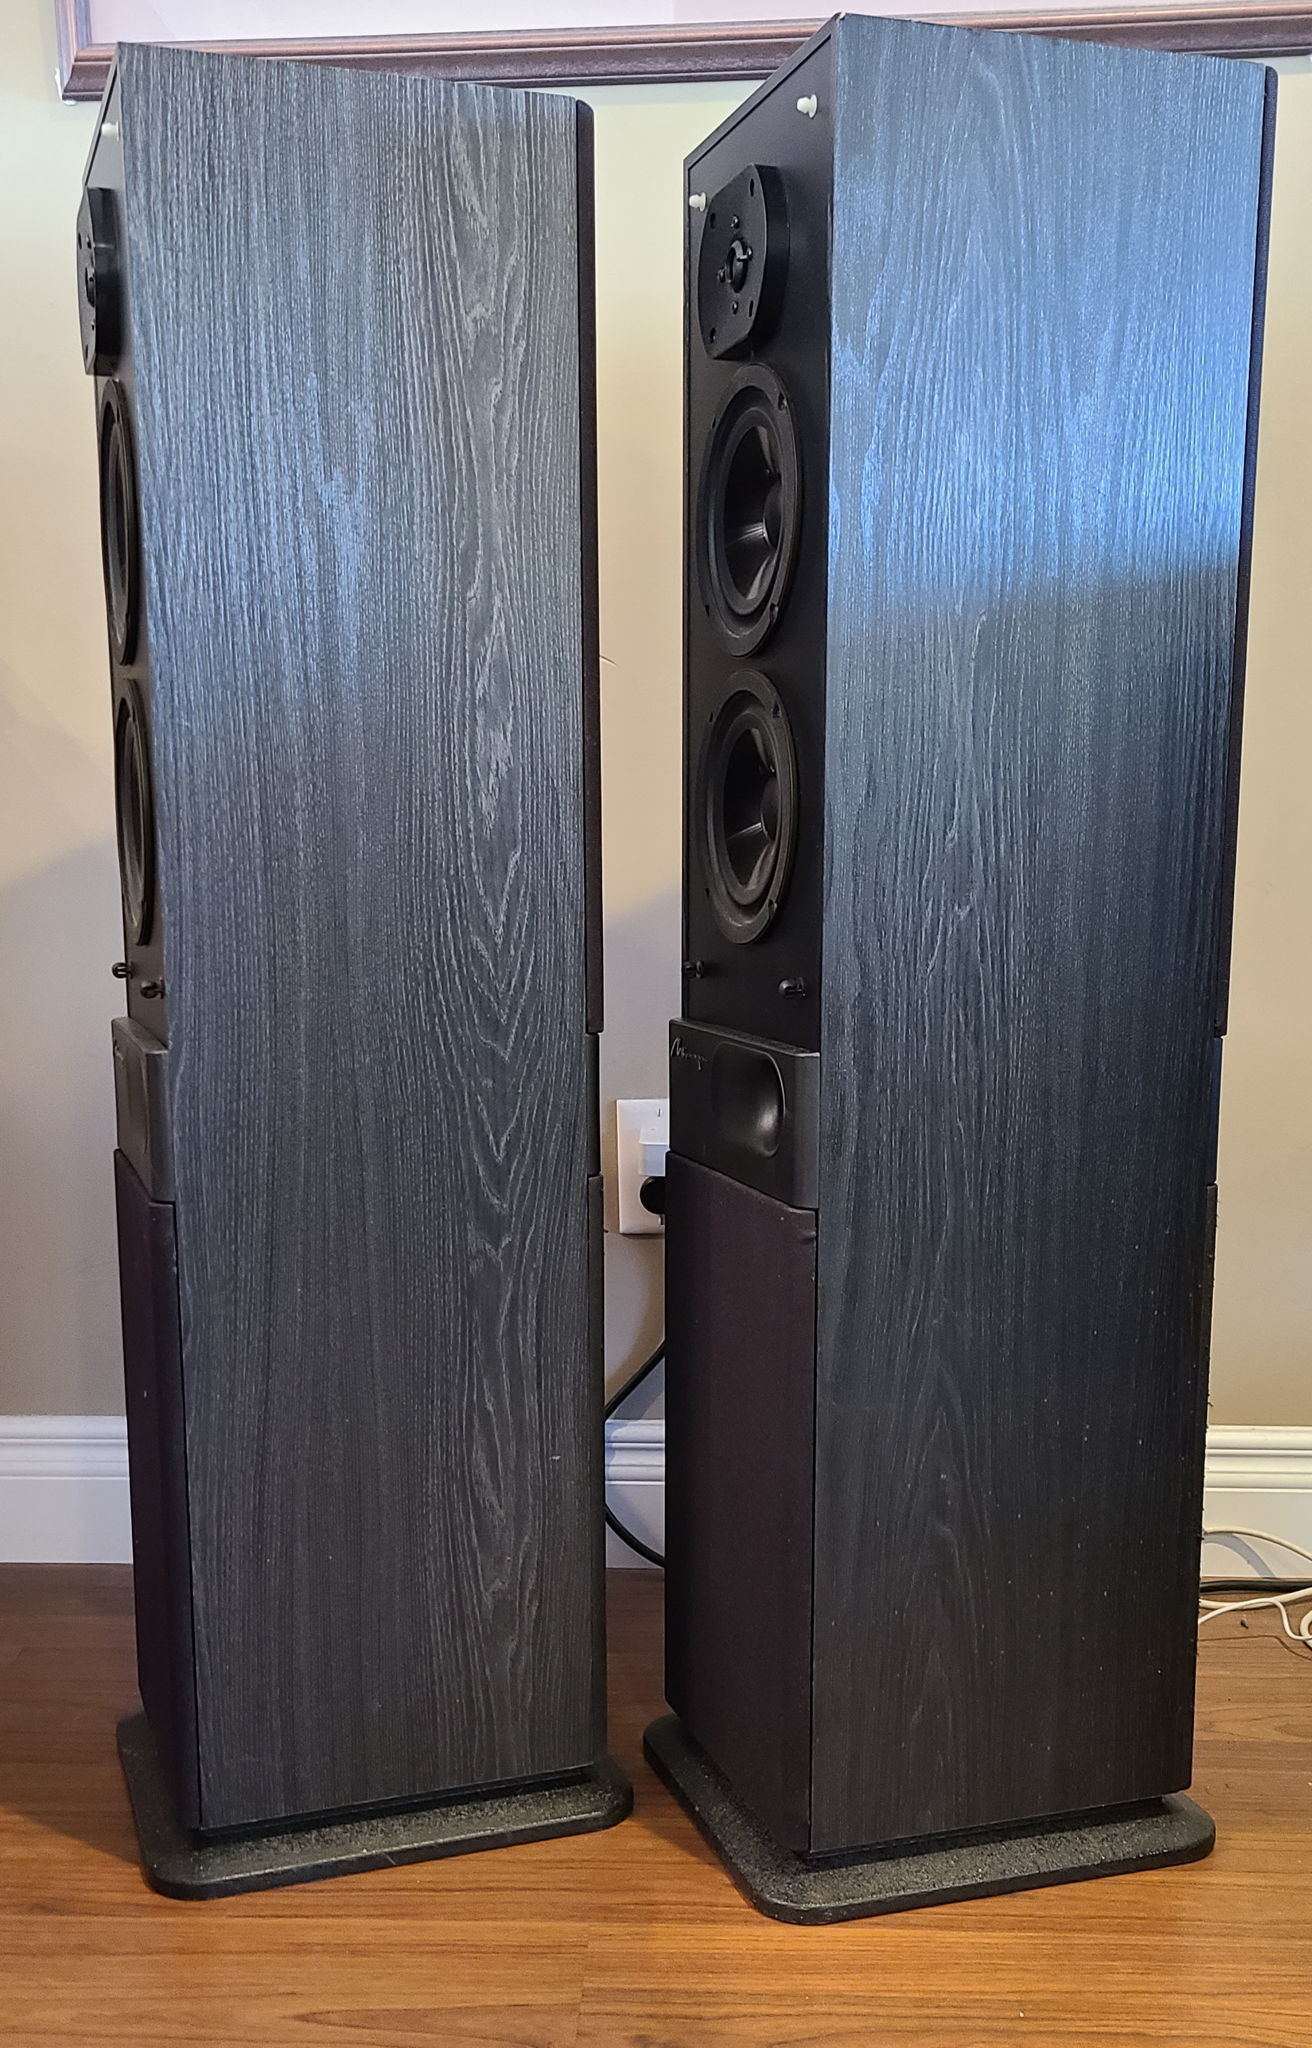 Mirage M-990 Loudspeakers. Shipping Included. 6